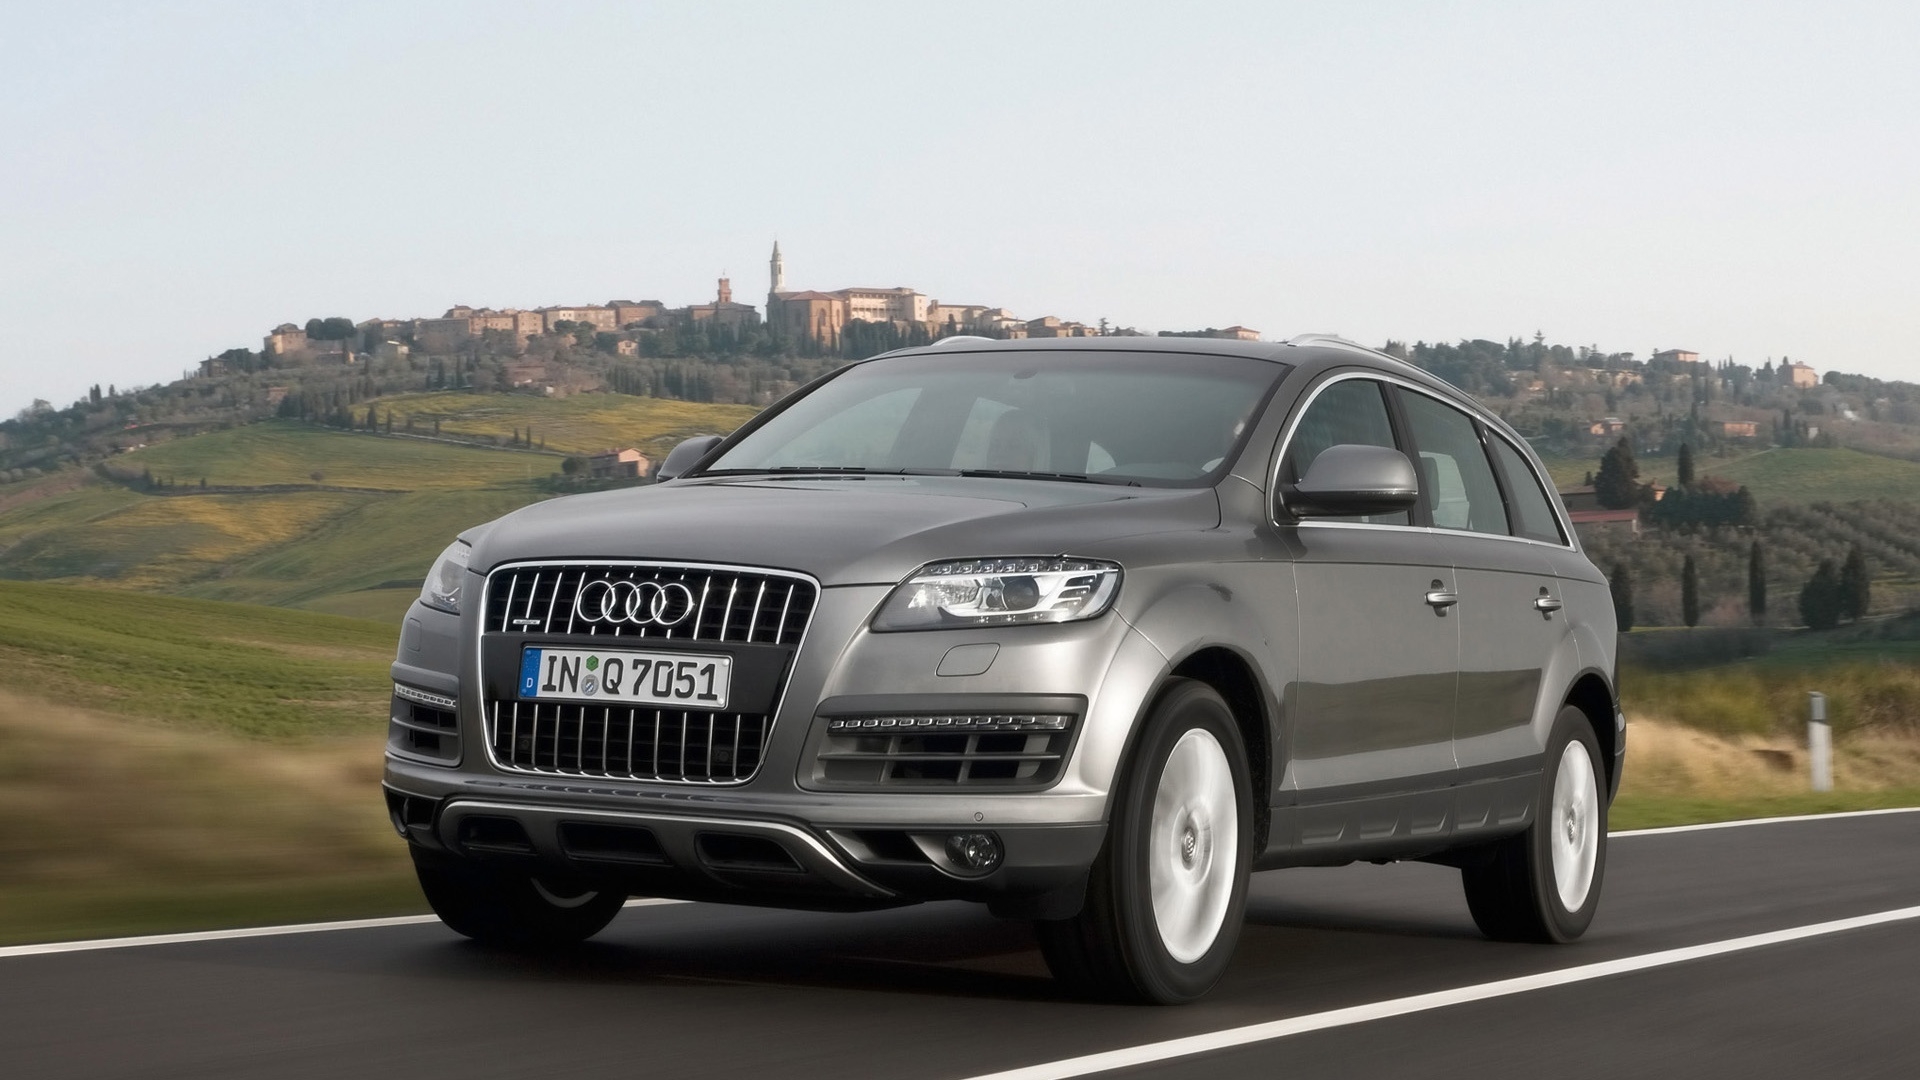 2009 Audi Q7 - Grey Front Angle Speed 1 for 1920 x 1080 HDTV 1080p resolution